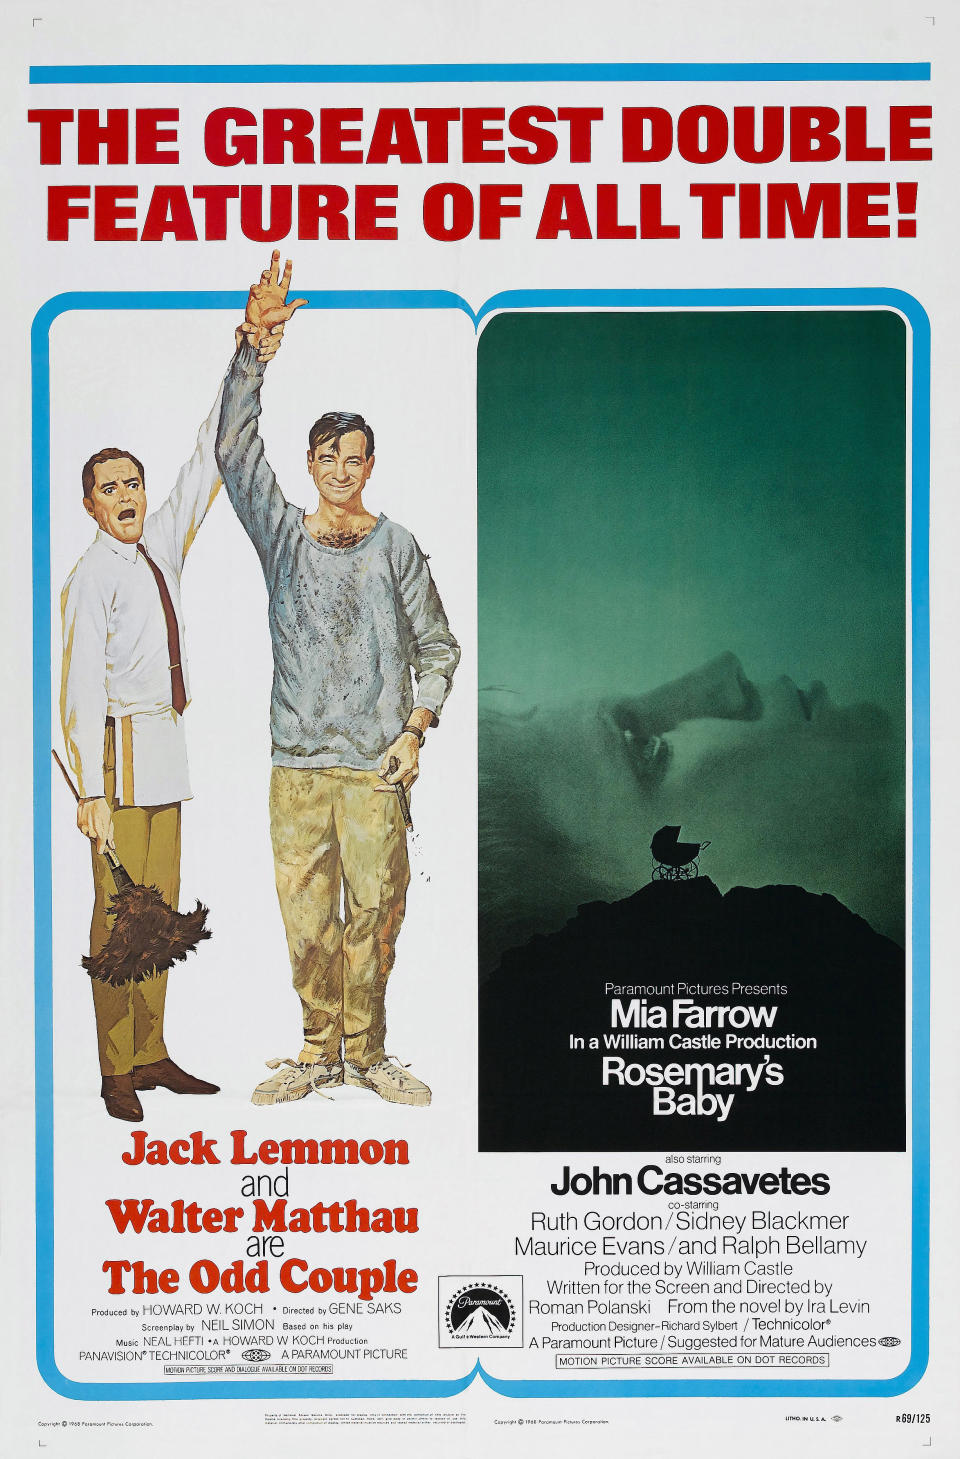 A double-feature poster